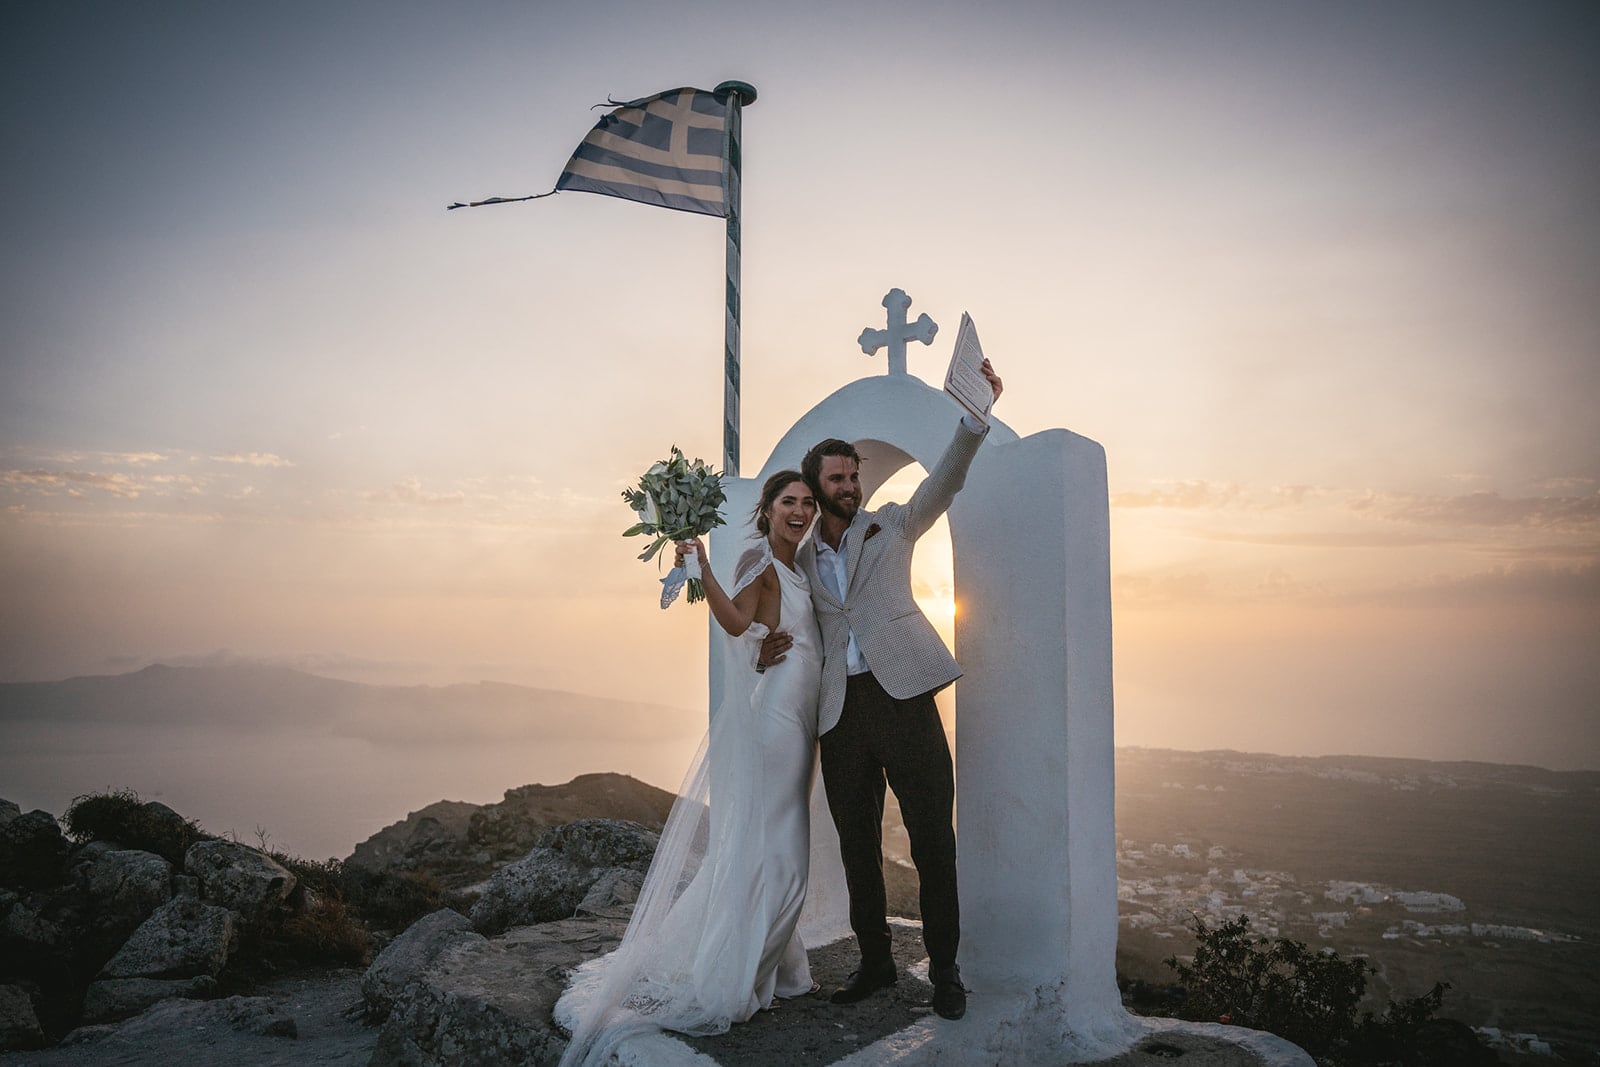 With the backdrop of a spectacular sunset, their love story finds its pinnacle moment